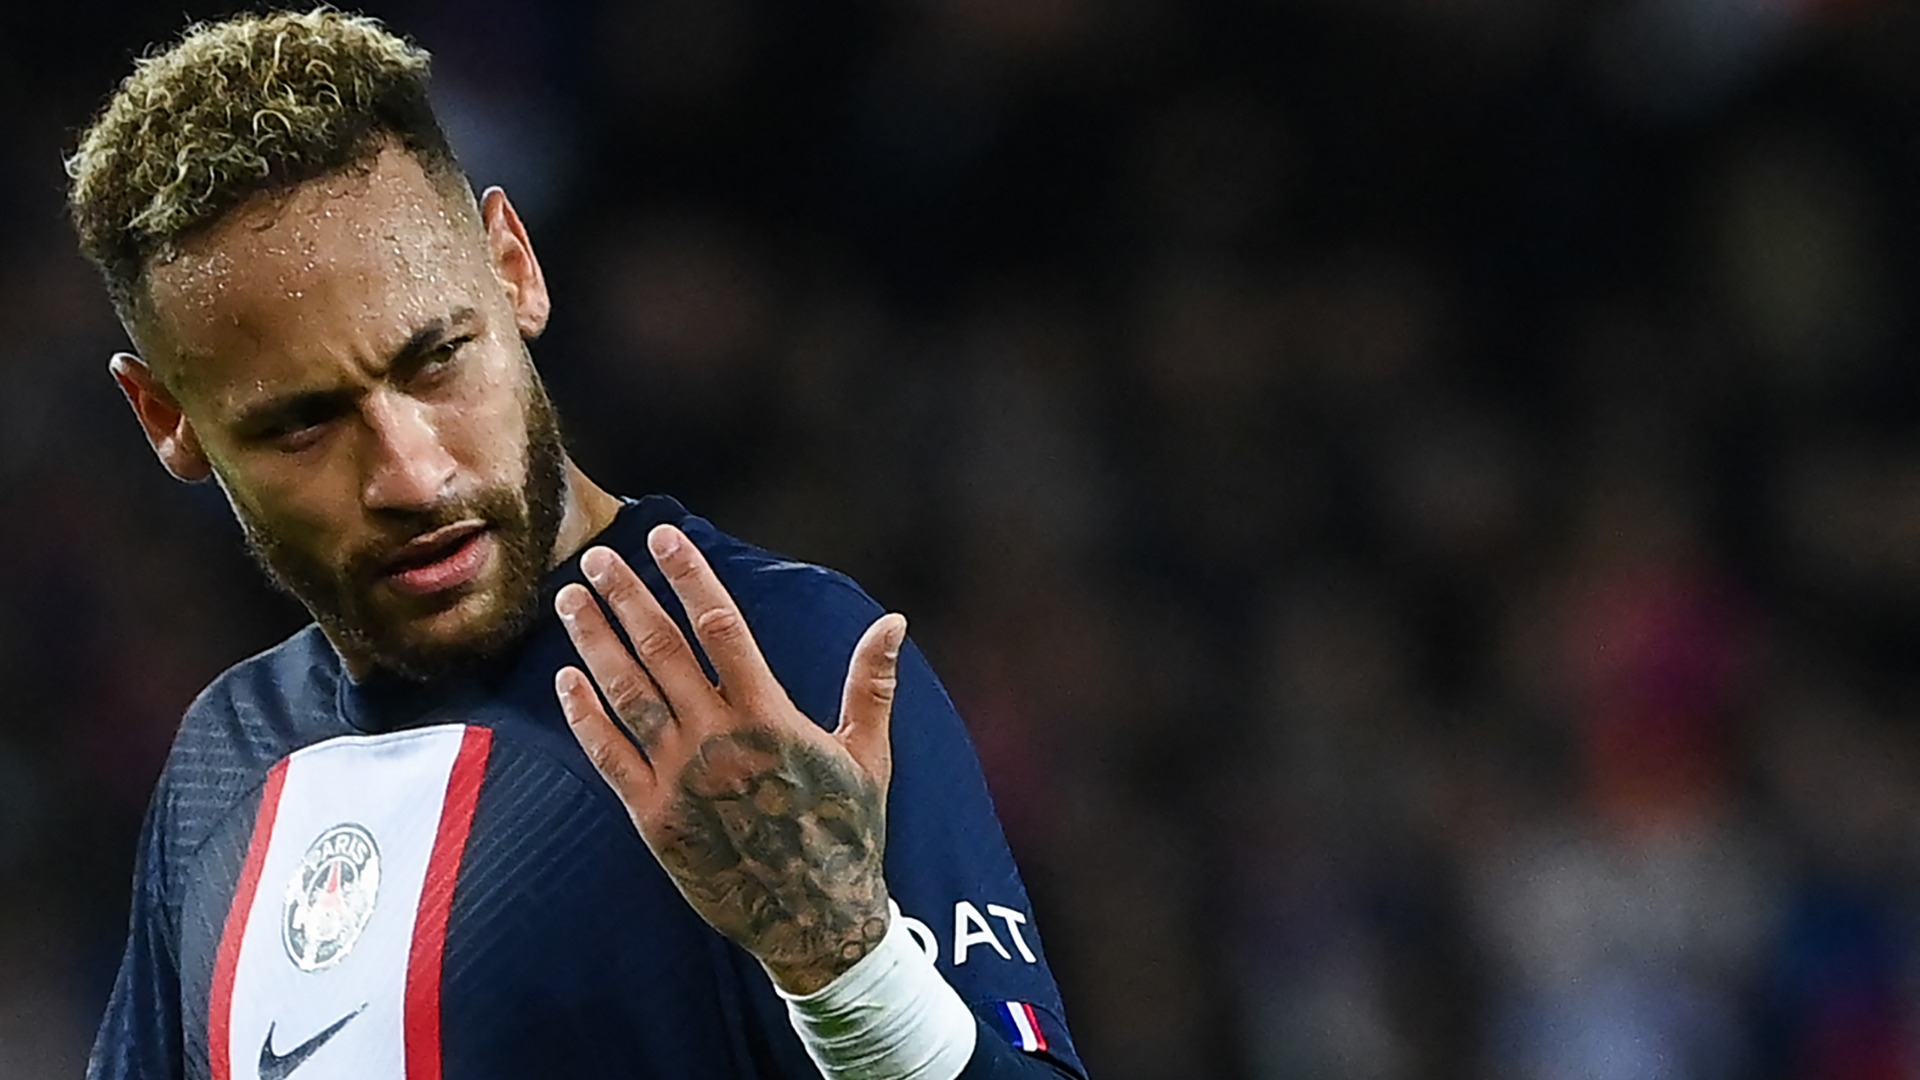 Neymar Should Be PSG's No. 9 or Ride Bench, Rolland Courbis Says